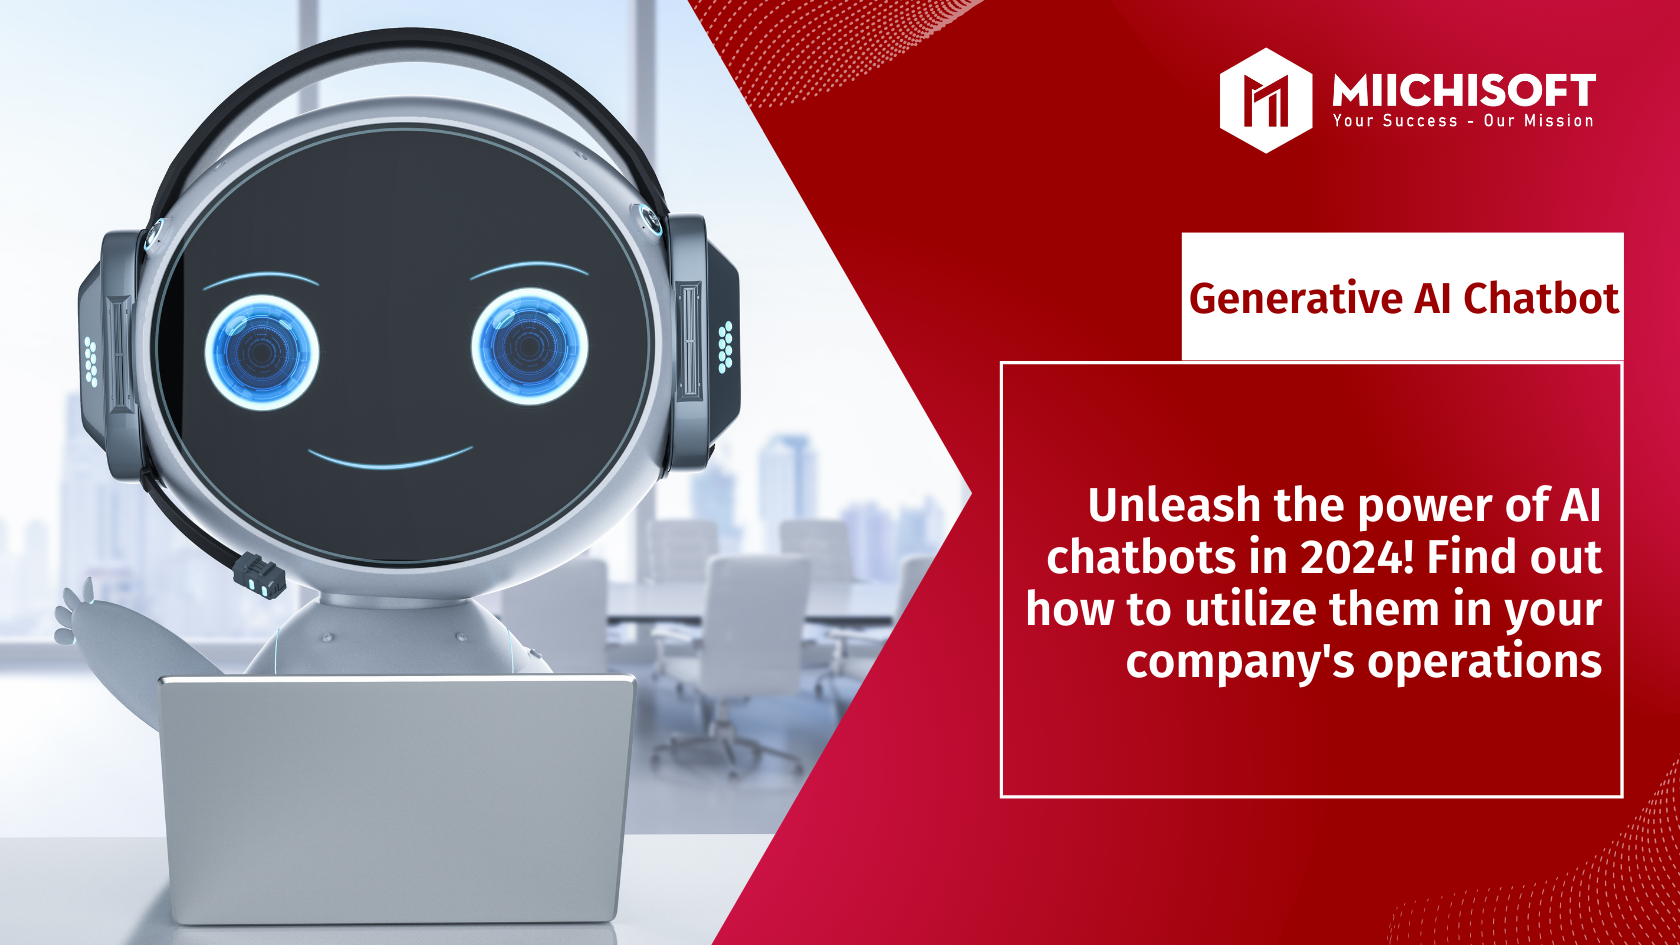 Unleash the power of AI chatbots in 2024! Find out how to utilize them in your company’s operations